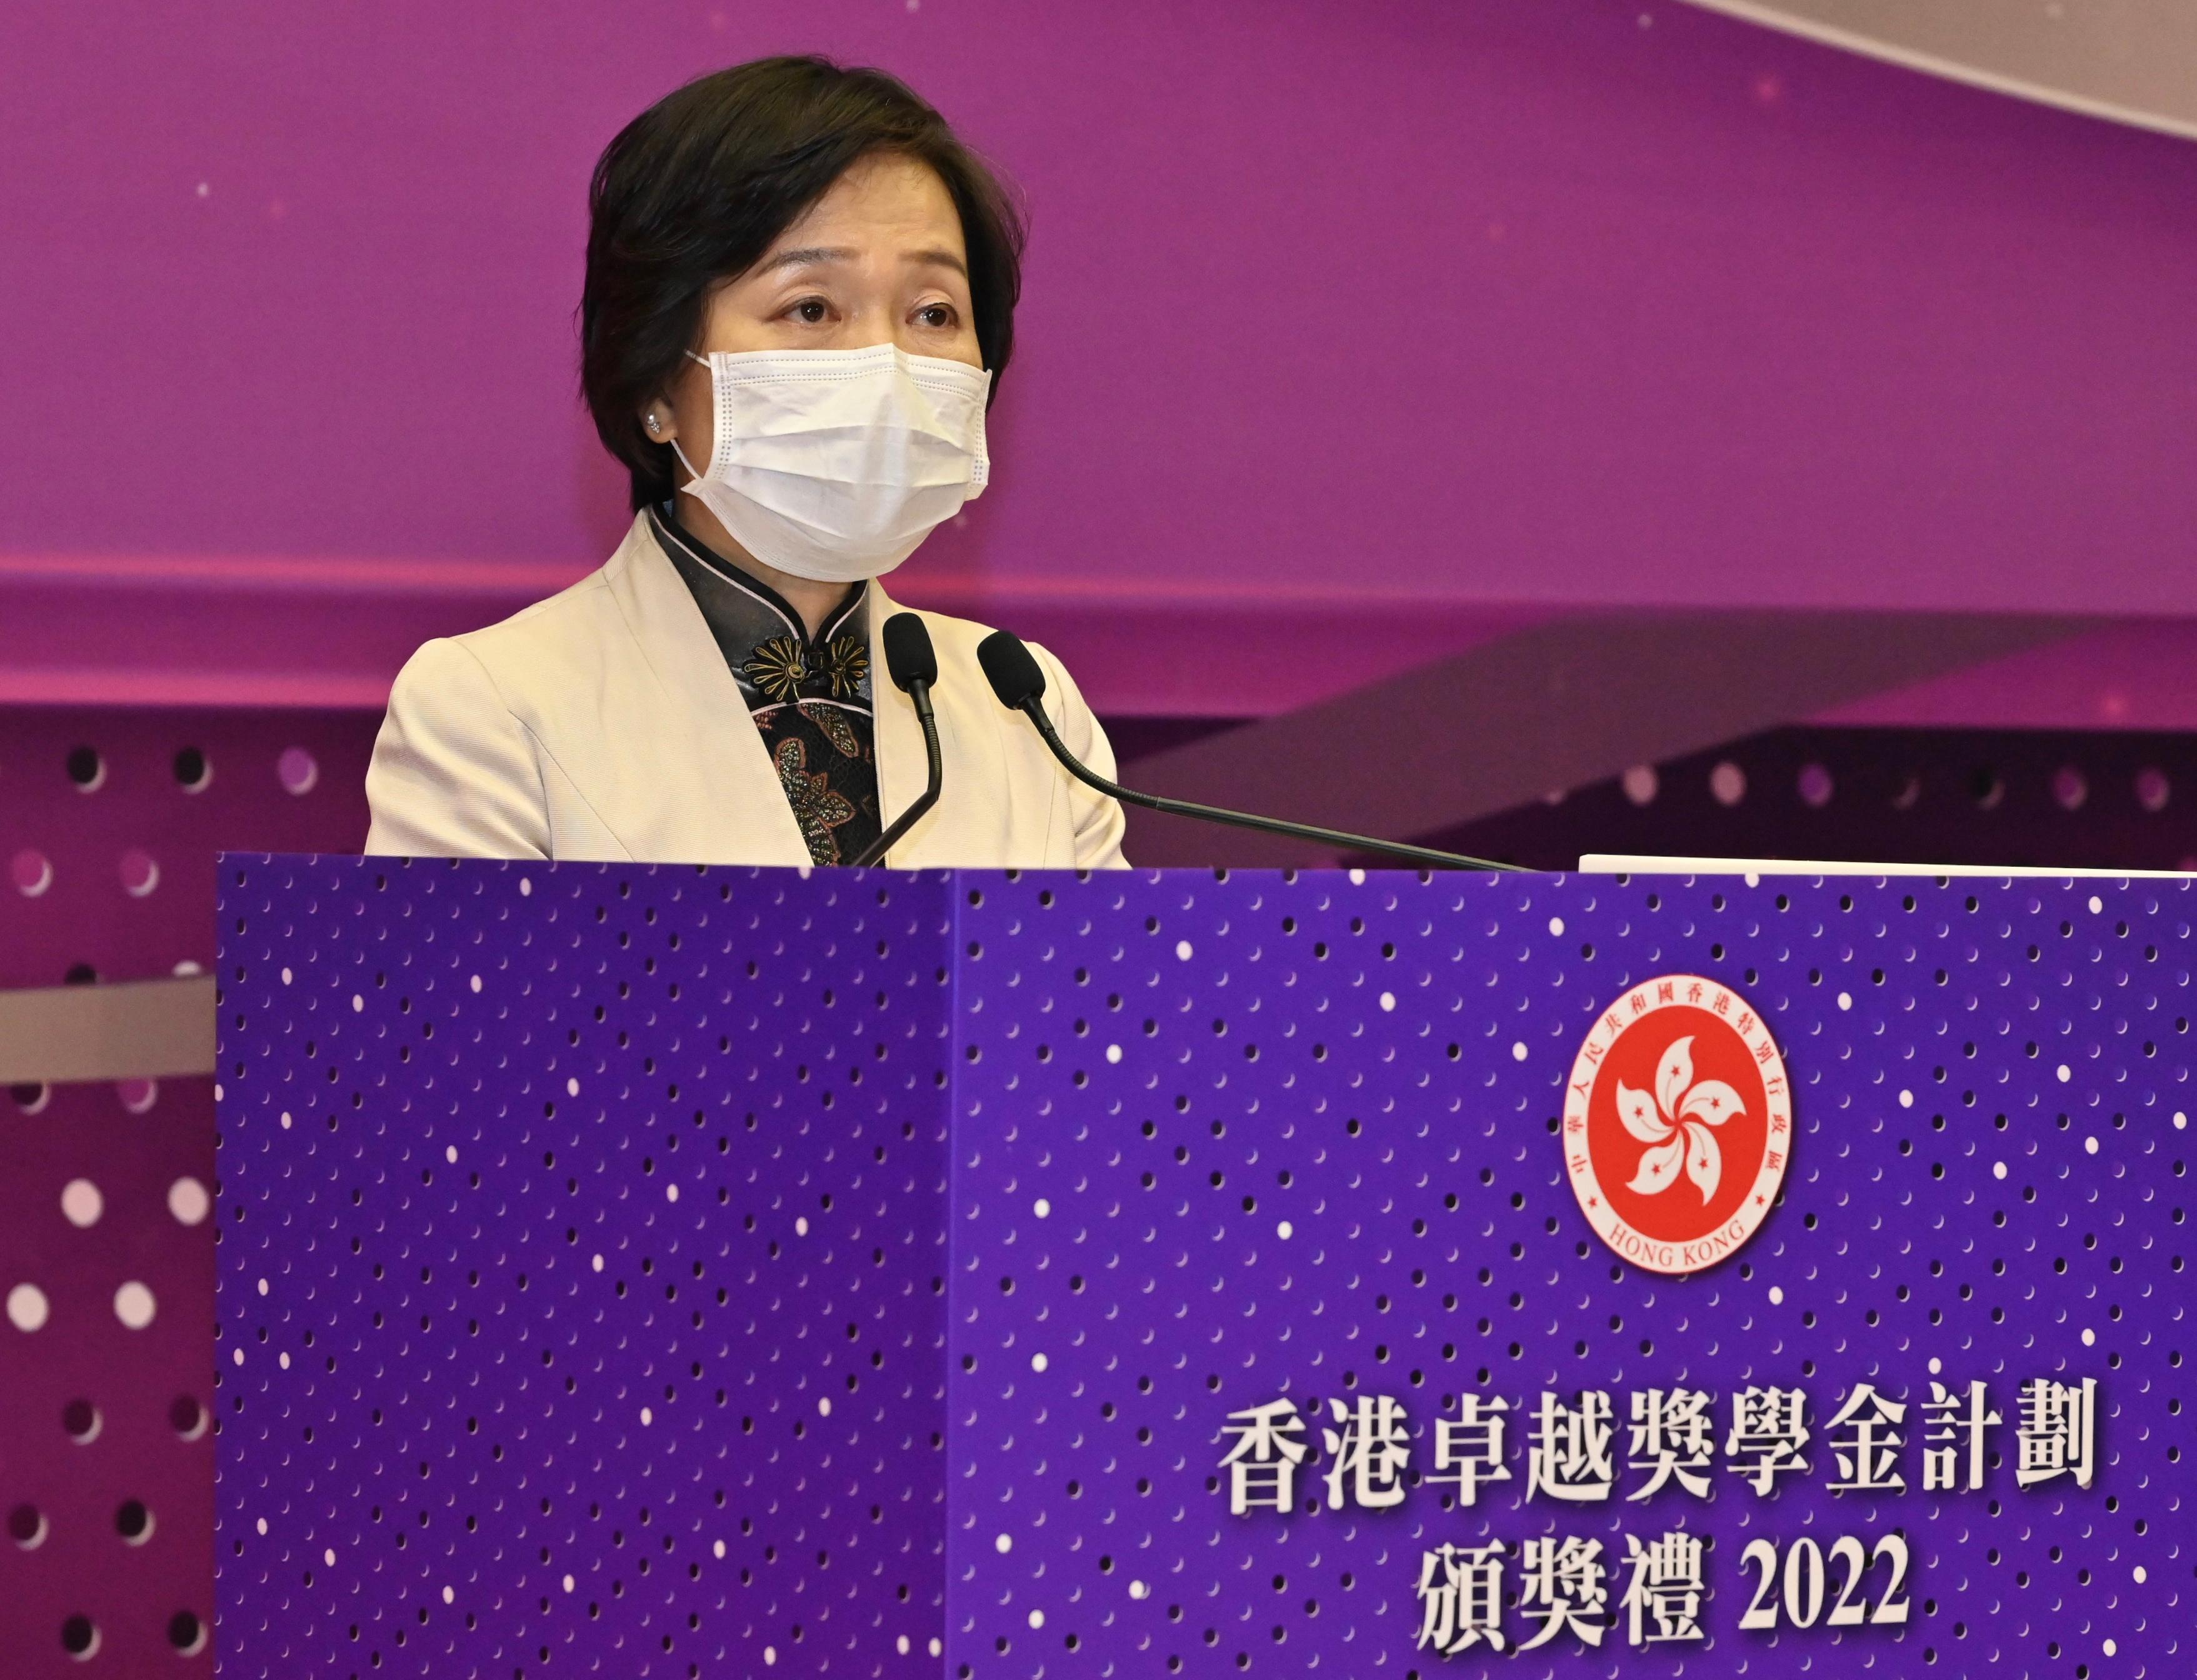 The Secretary for Education, Dr Choi Yuk-lin, speaks at the Award Presentation Ceremony 2022 of the Hong Kong Scholarship for Excellence Scheme today (August 24).